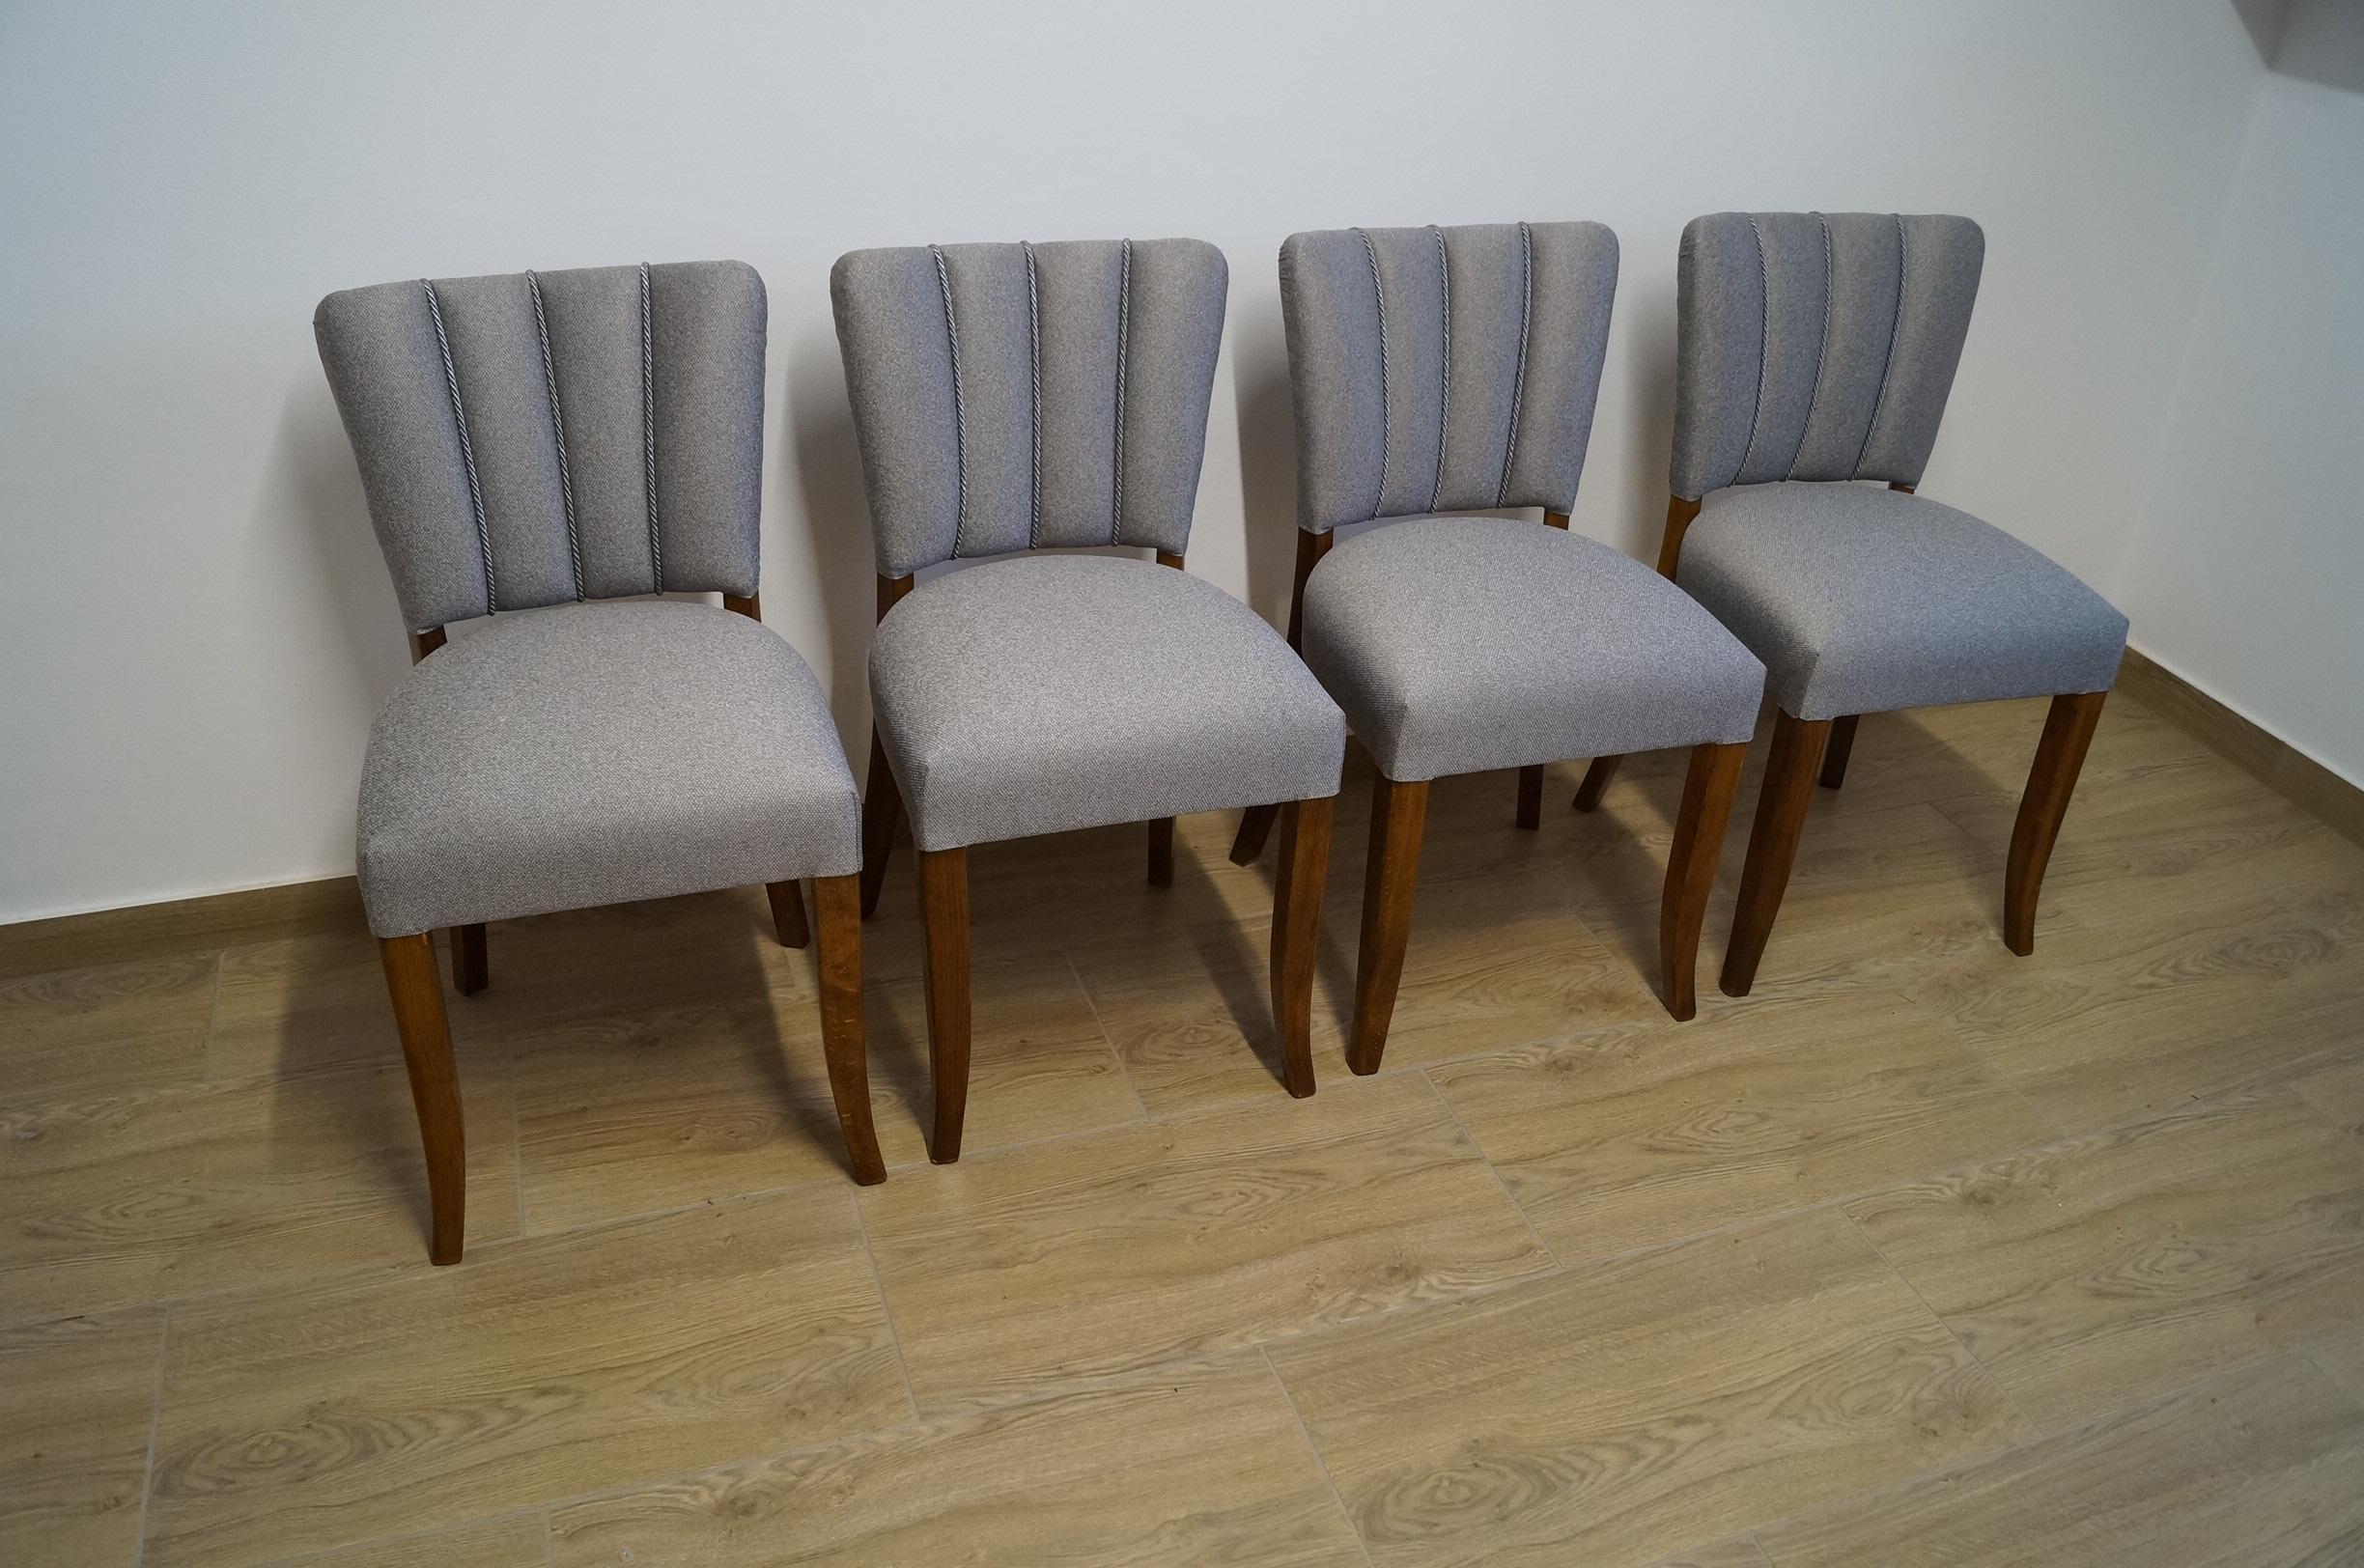 Art Deco four chairs by J. Halabala from 1940 we present the chairs by J. Halabala from 1950s (a Czech designer ranked among the most outstanding creators of the modern period. The peak of his career fell on the 1930s and 1940s when he worked for a